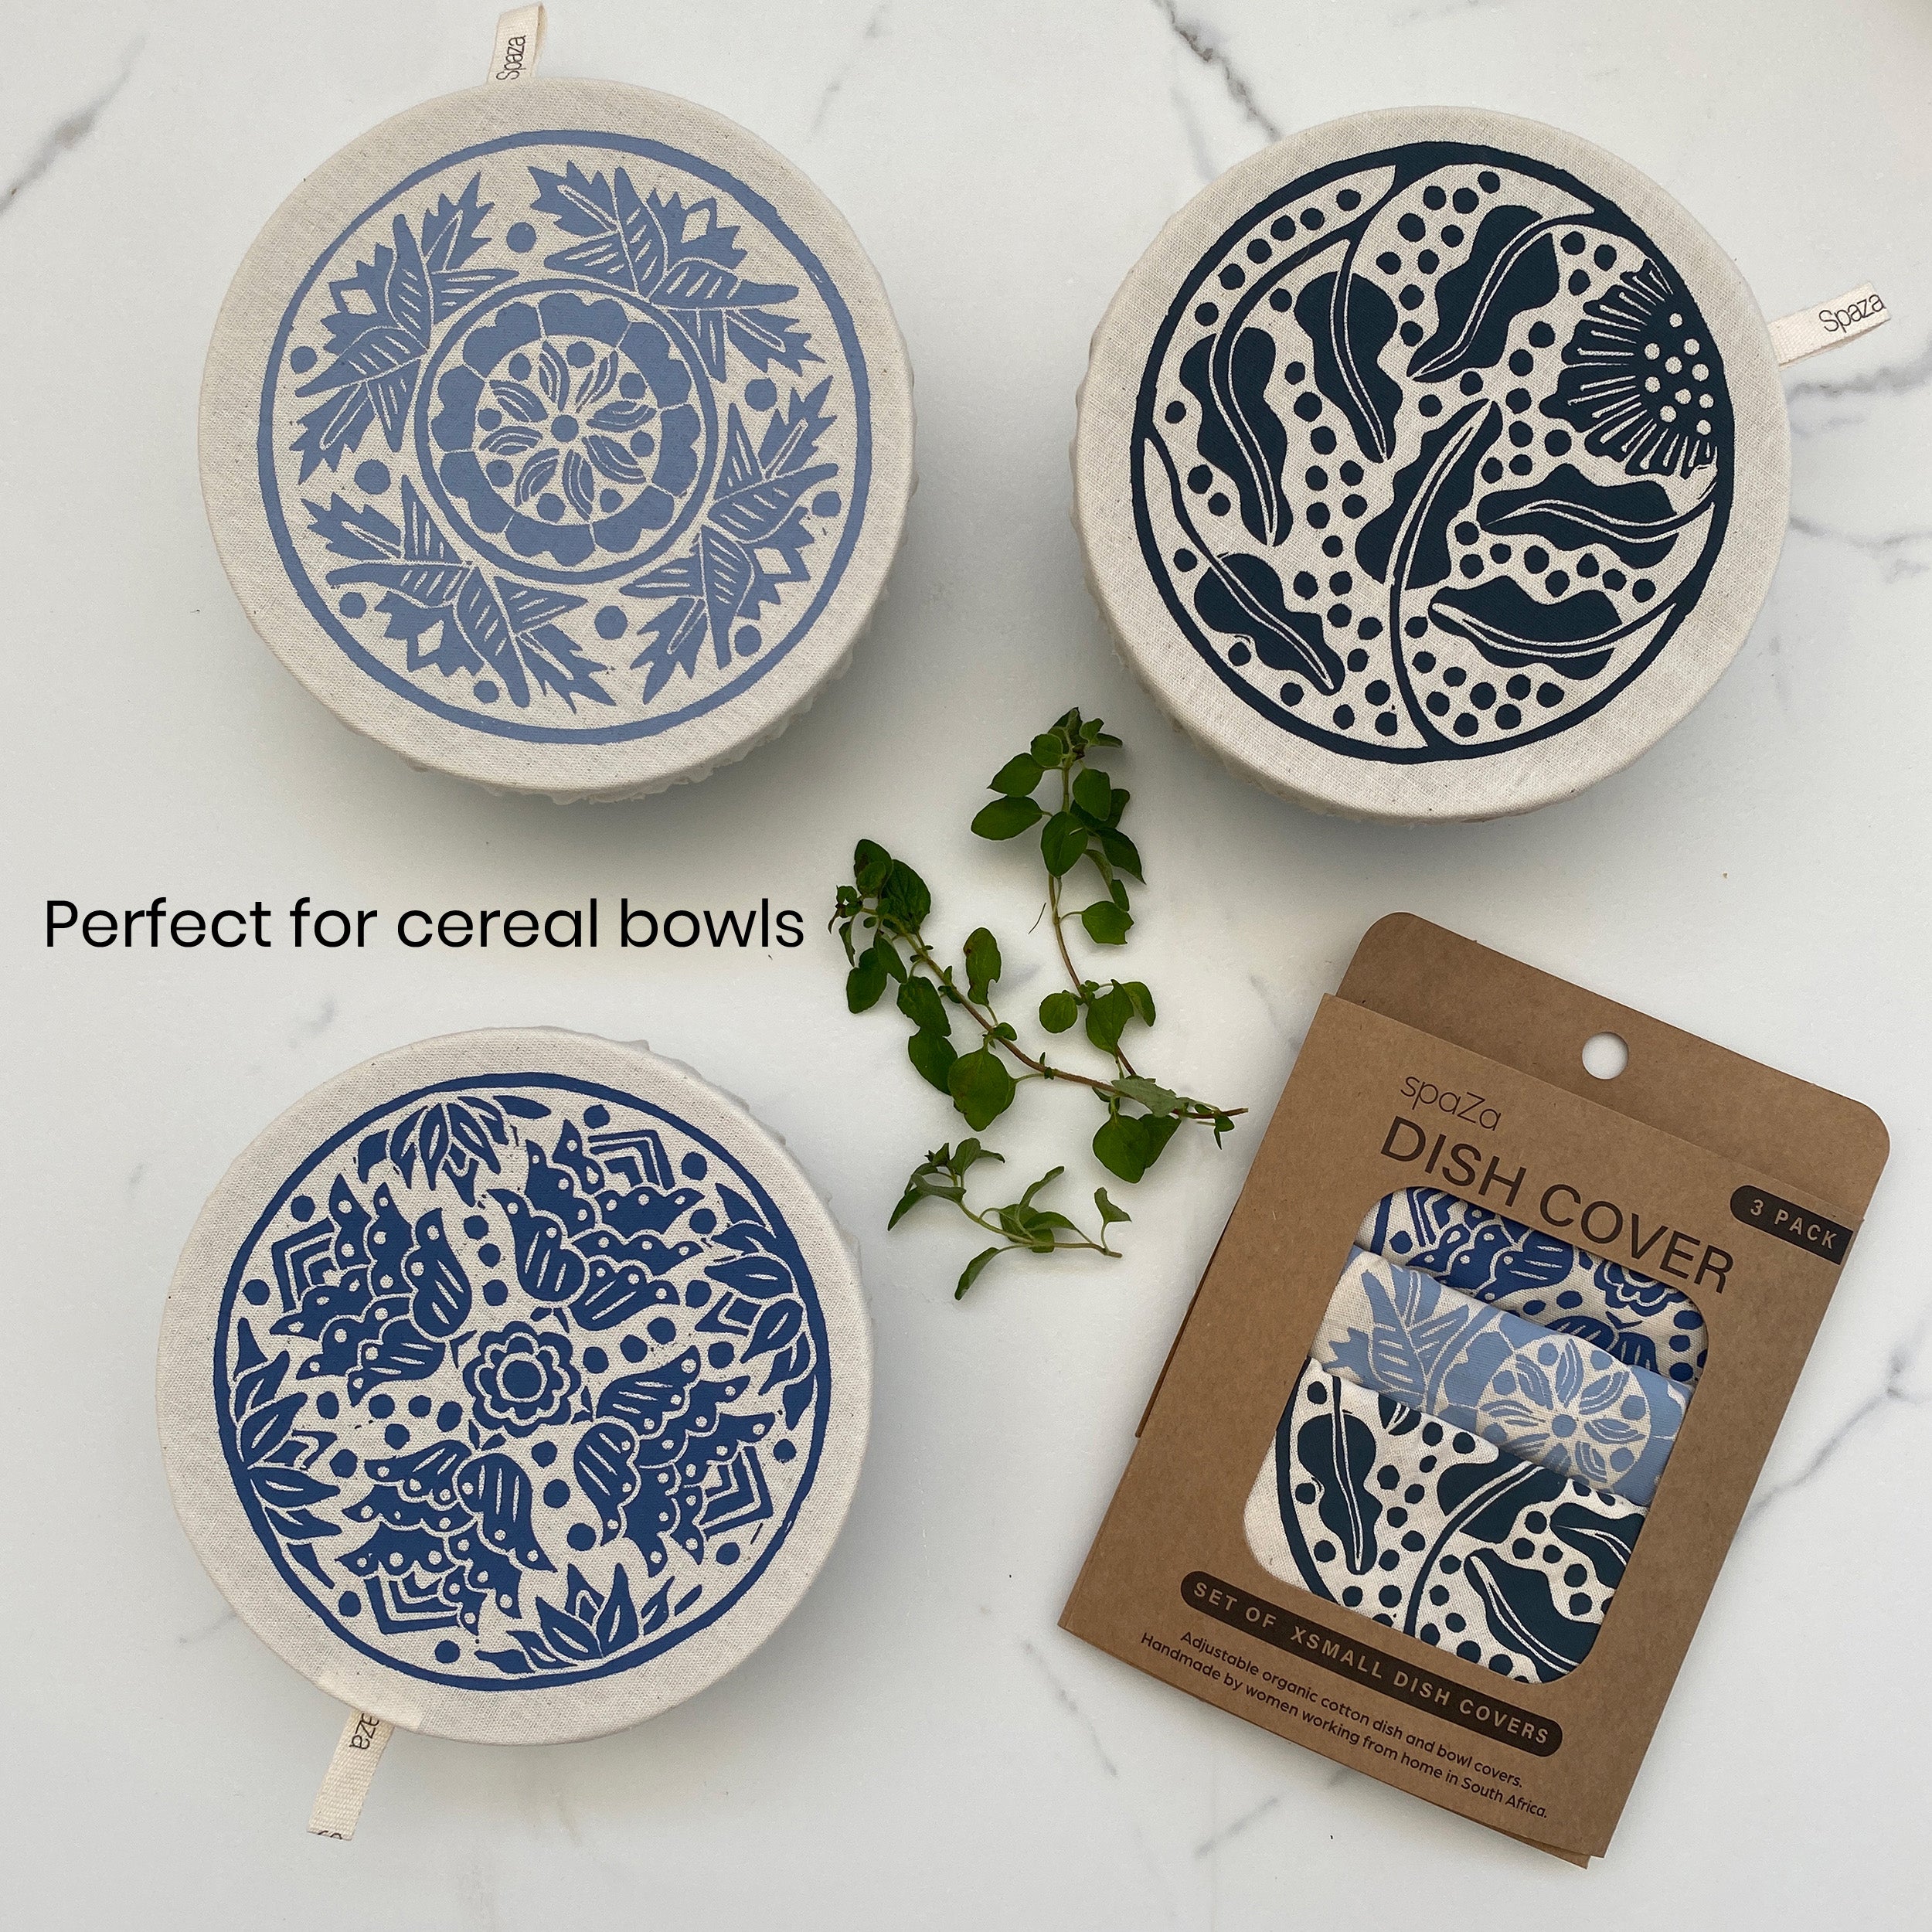 Dish and Bowl Covers – SpazaStore